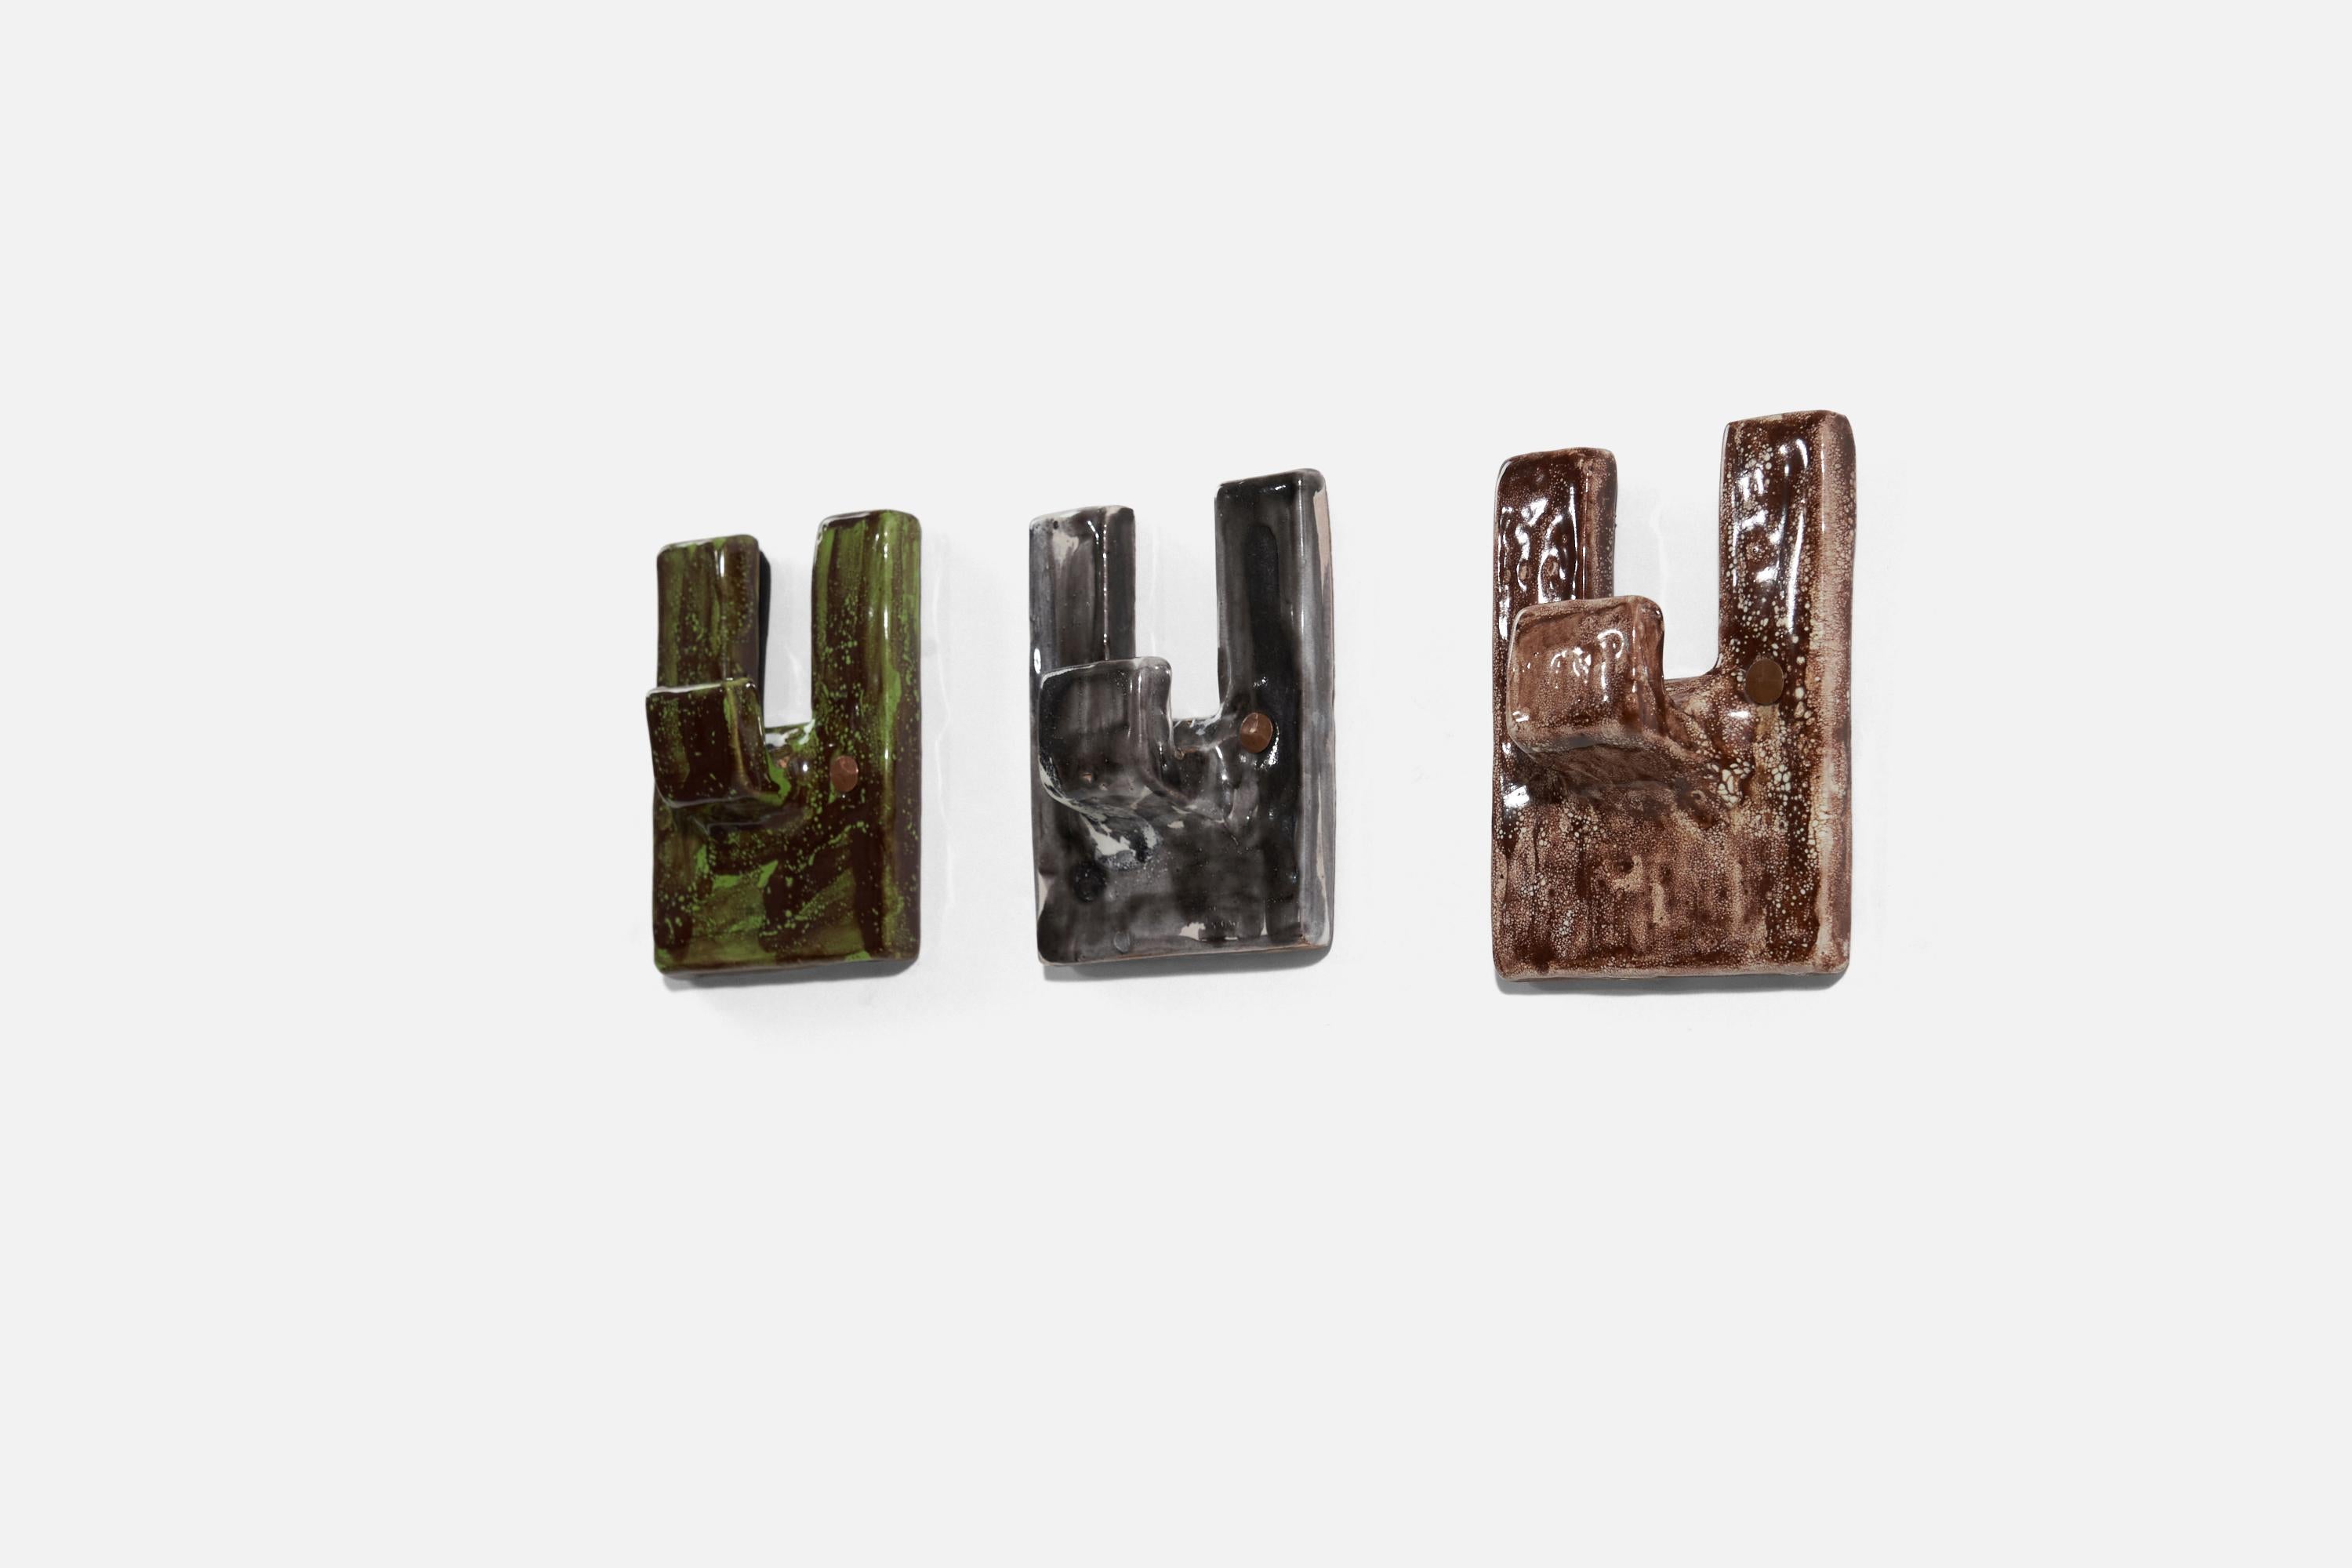 A set of three ceramic coat hangers, designed and produced by an Italian designer, Italy, 1950s.

Glaze features brown-grey-green colors.